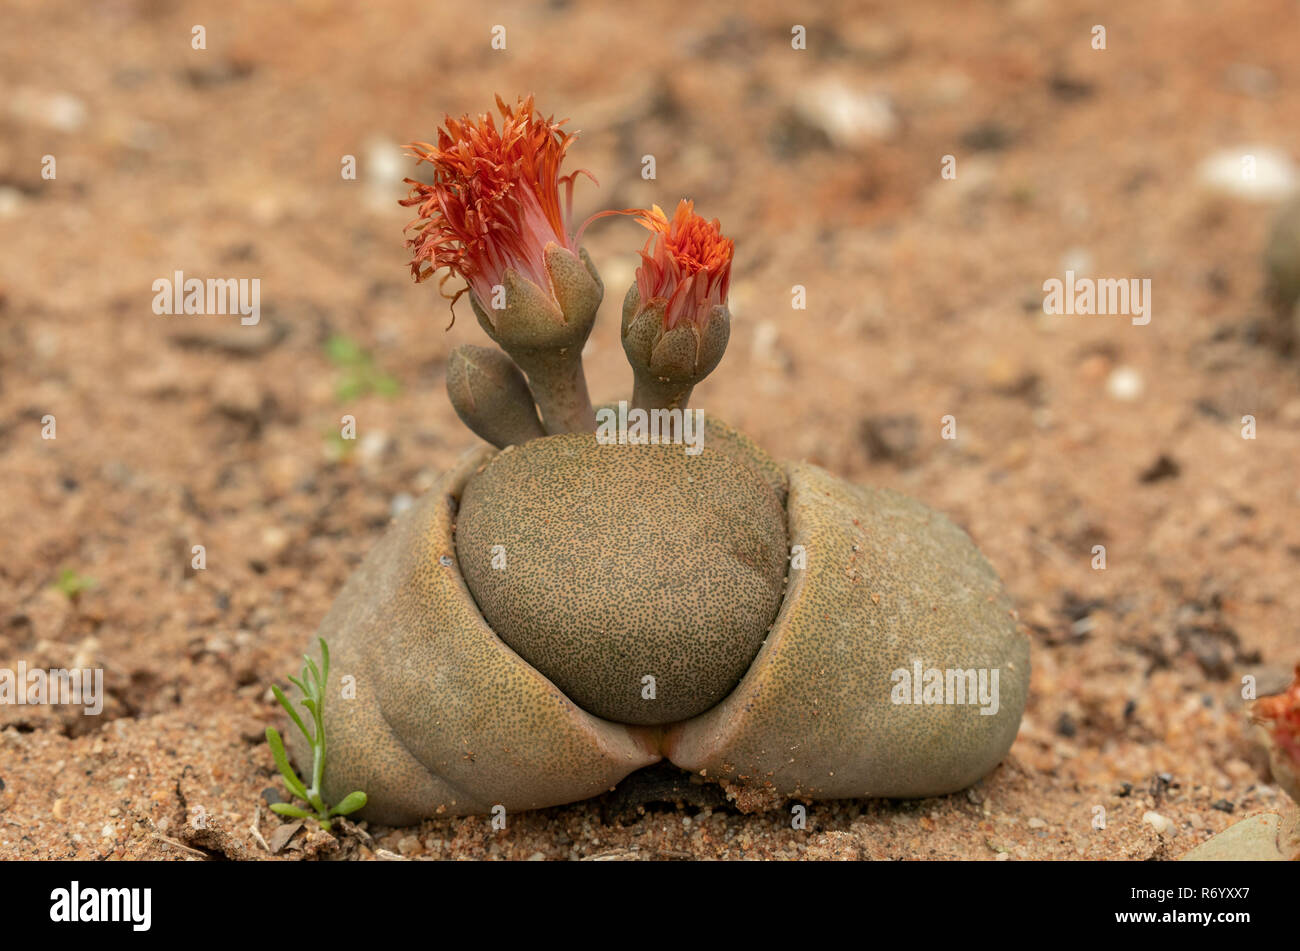 mimicry plant, Pleiospilos bolusii, in flower in the desert, South Africa. Stock Photo